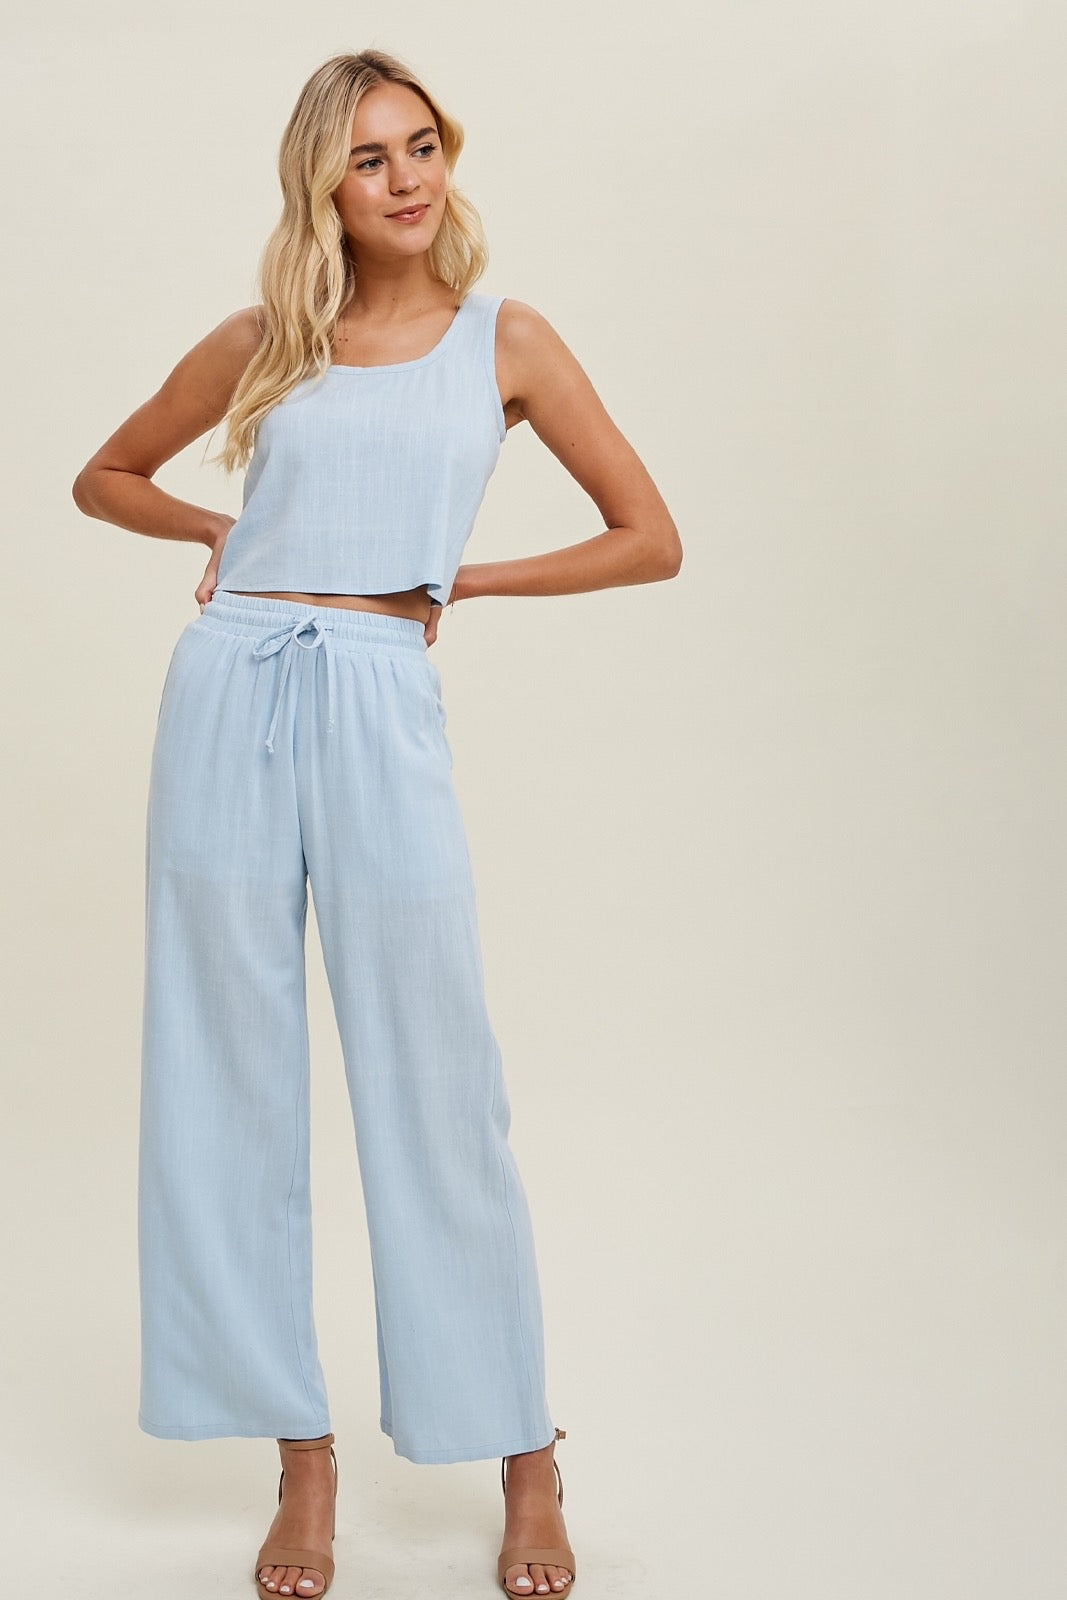 Wishlist® Linen Two Piece Crop Tank Top And Pants Set